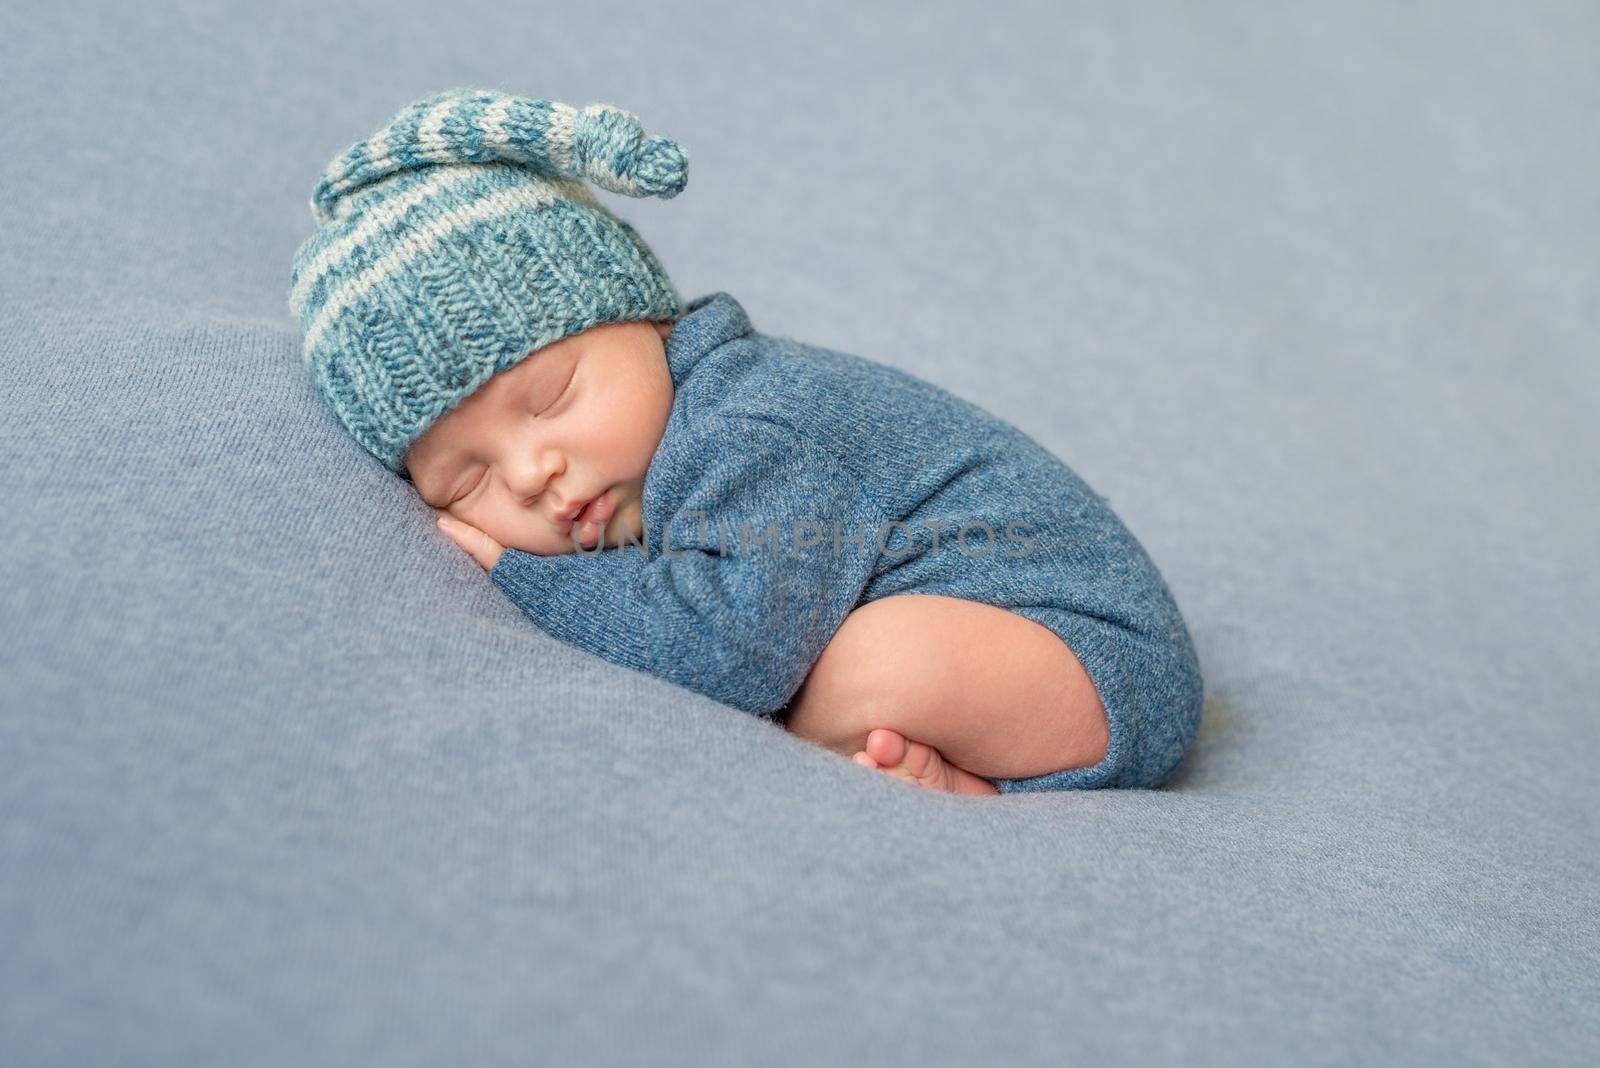 sleeping newborn baby in blue jumpsuit and hat by tan4ikk1